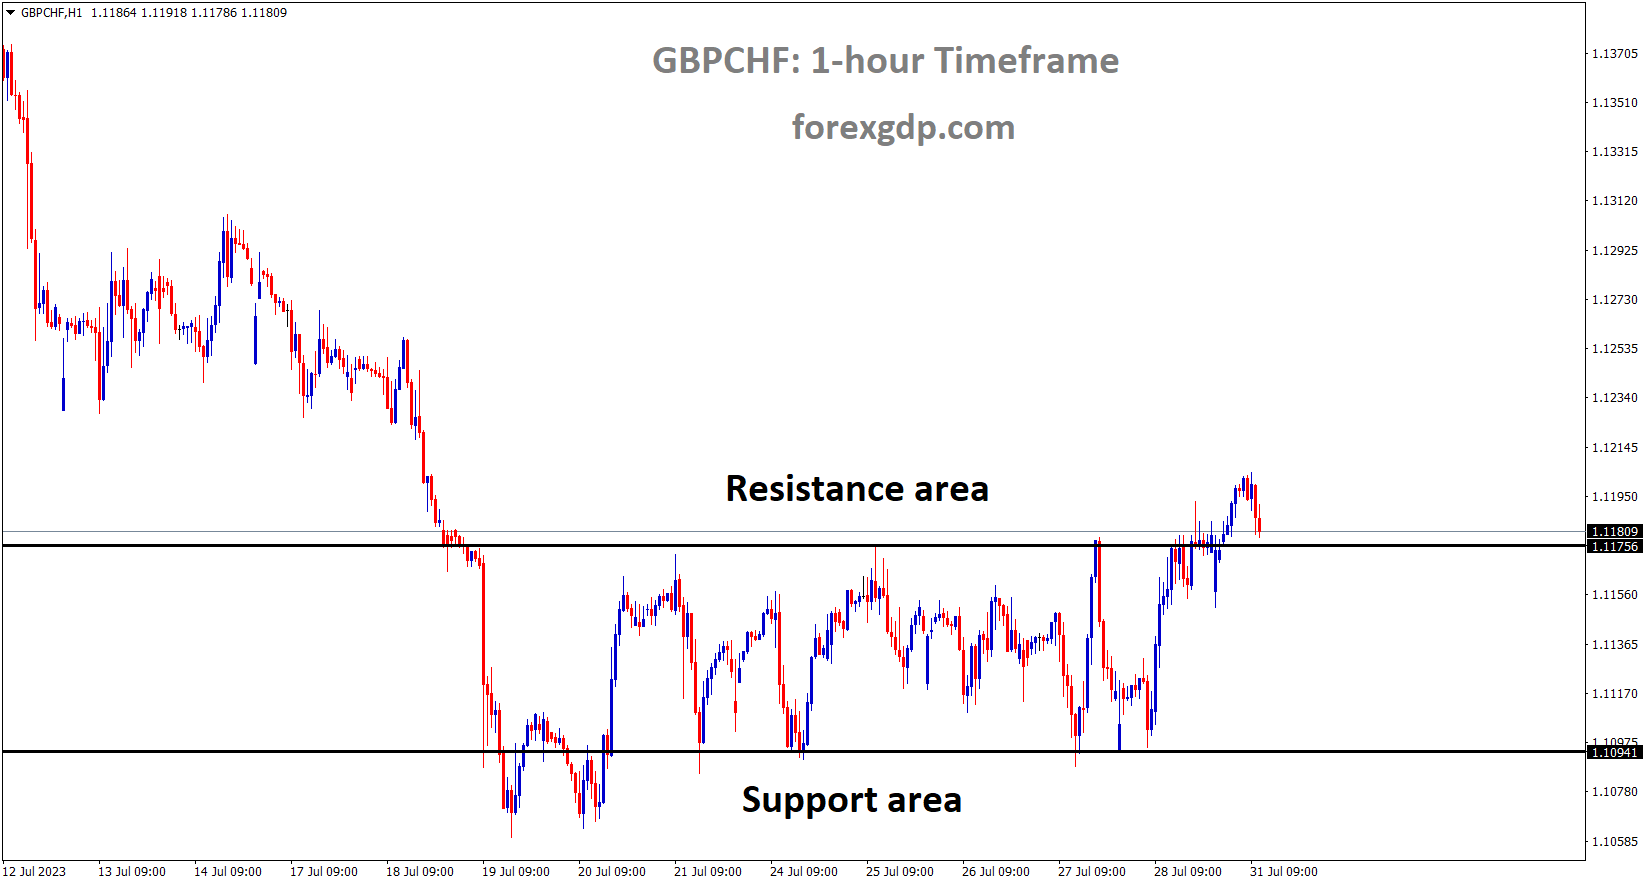 GBPCHF is moving in the Box pattern and the market has reached the resistance area of the pattern 1